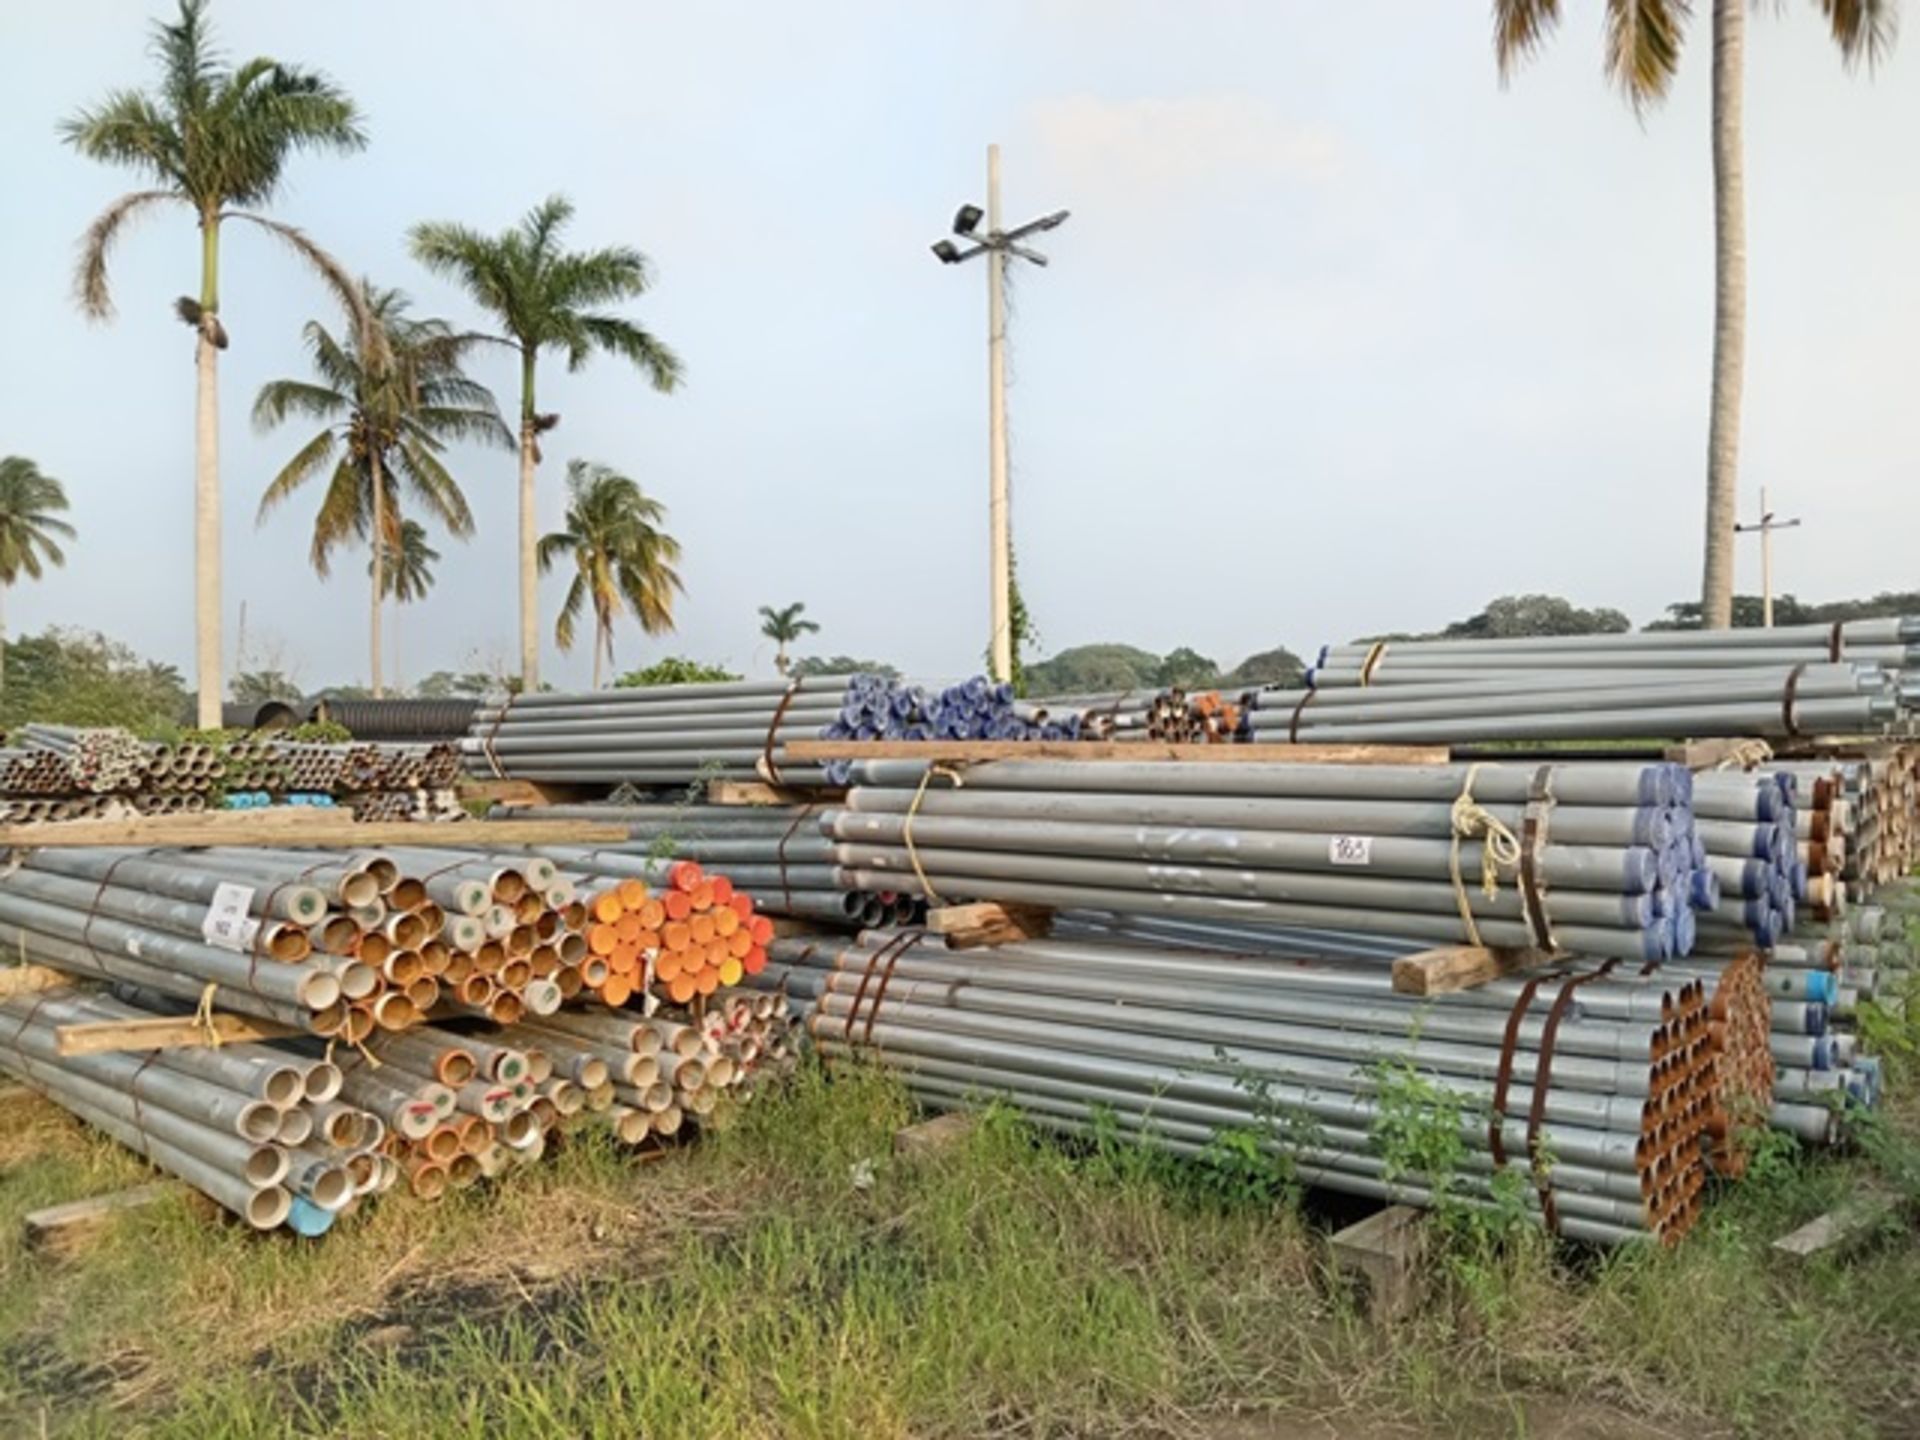 LOT OF 4375 METERS OF GALVANIZED CARBON STEEL PIPE WITH THREADED ENDS - Image 10 of 10